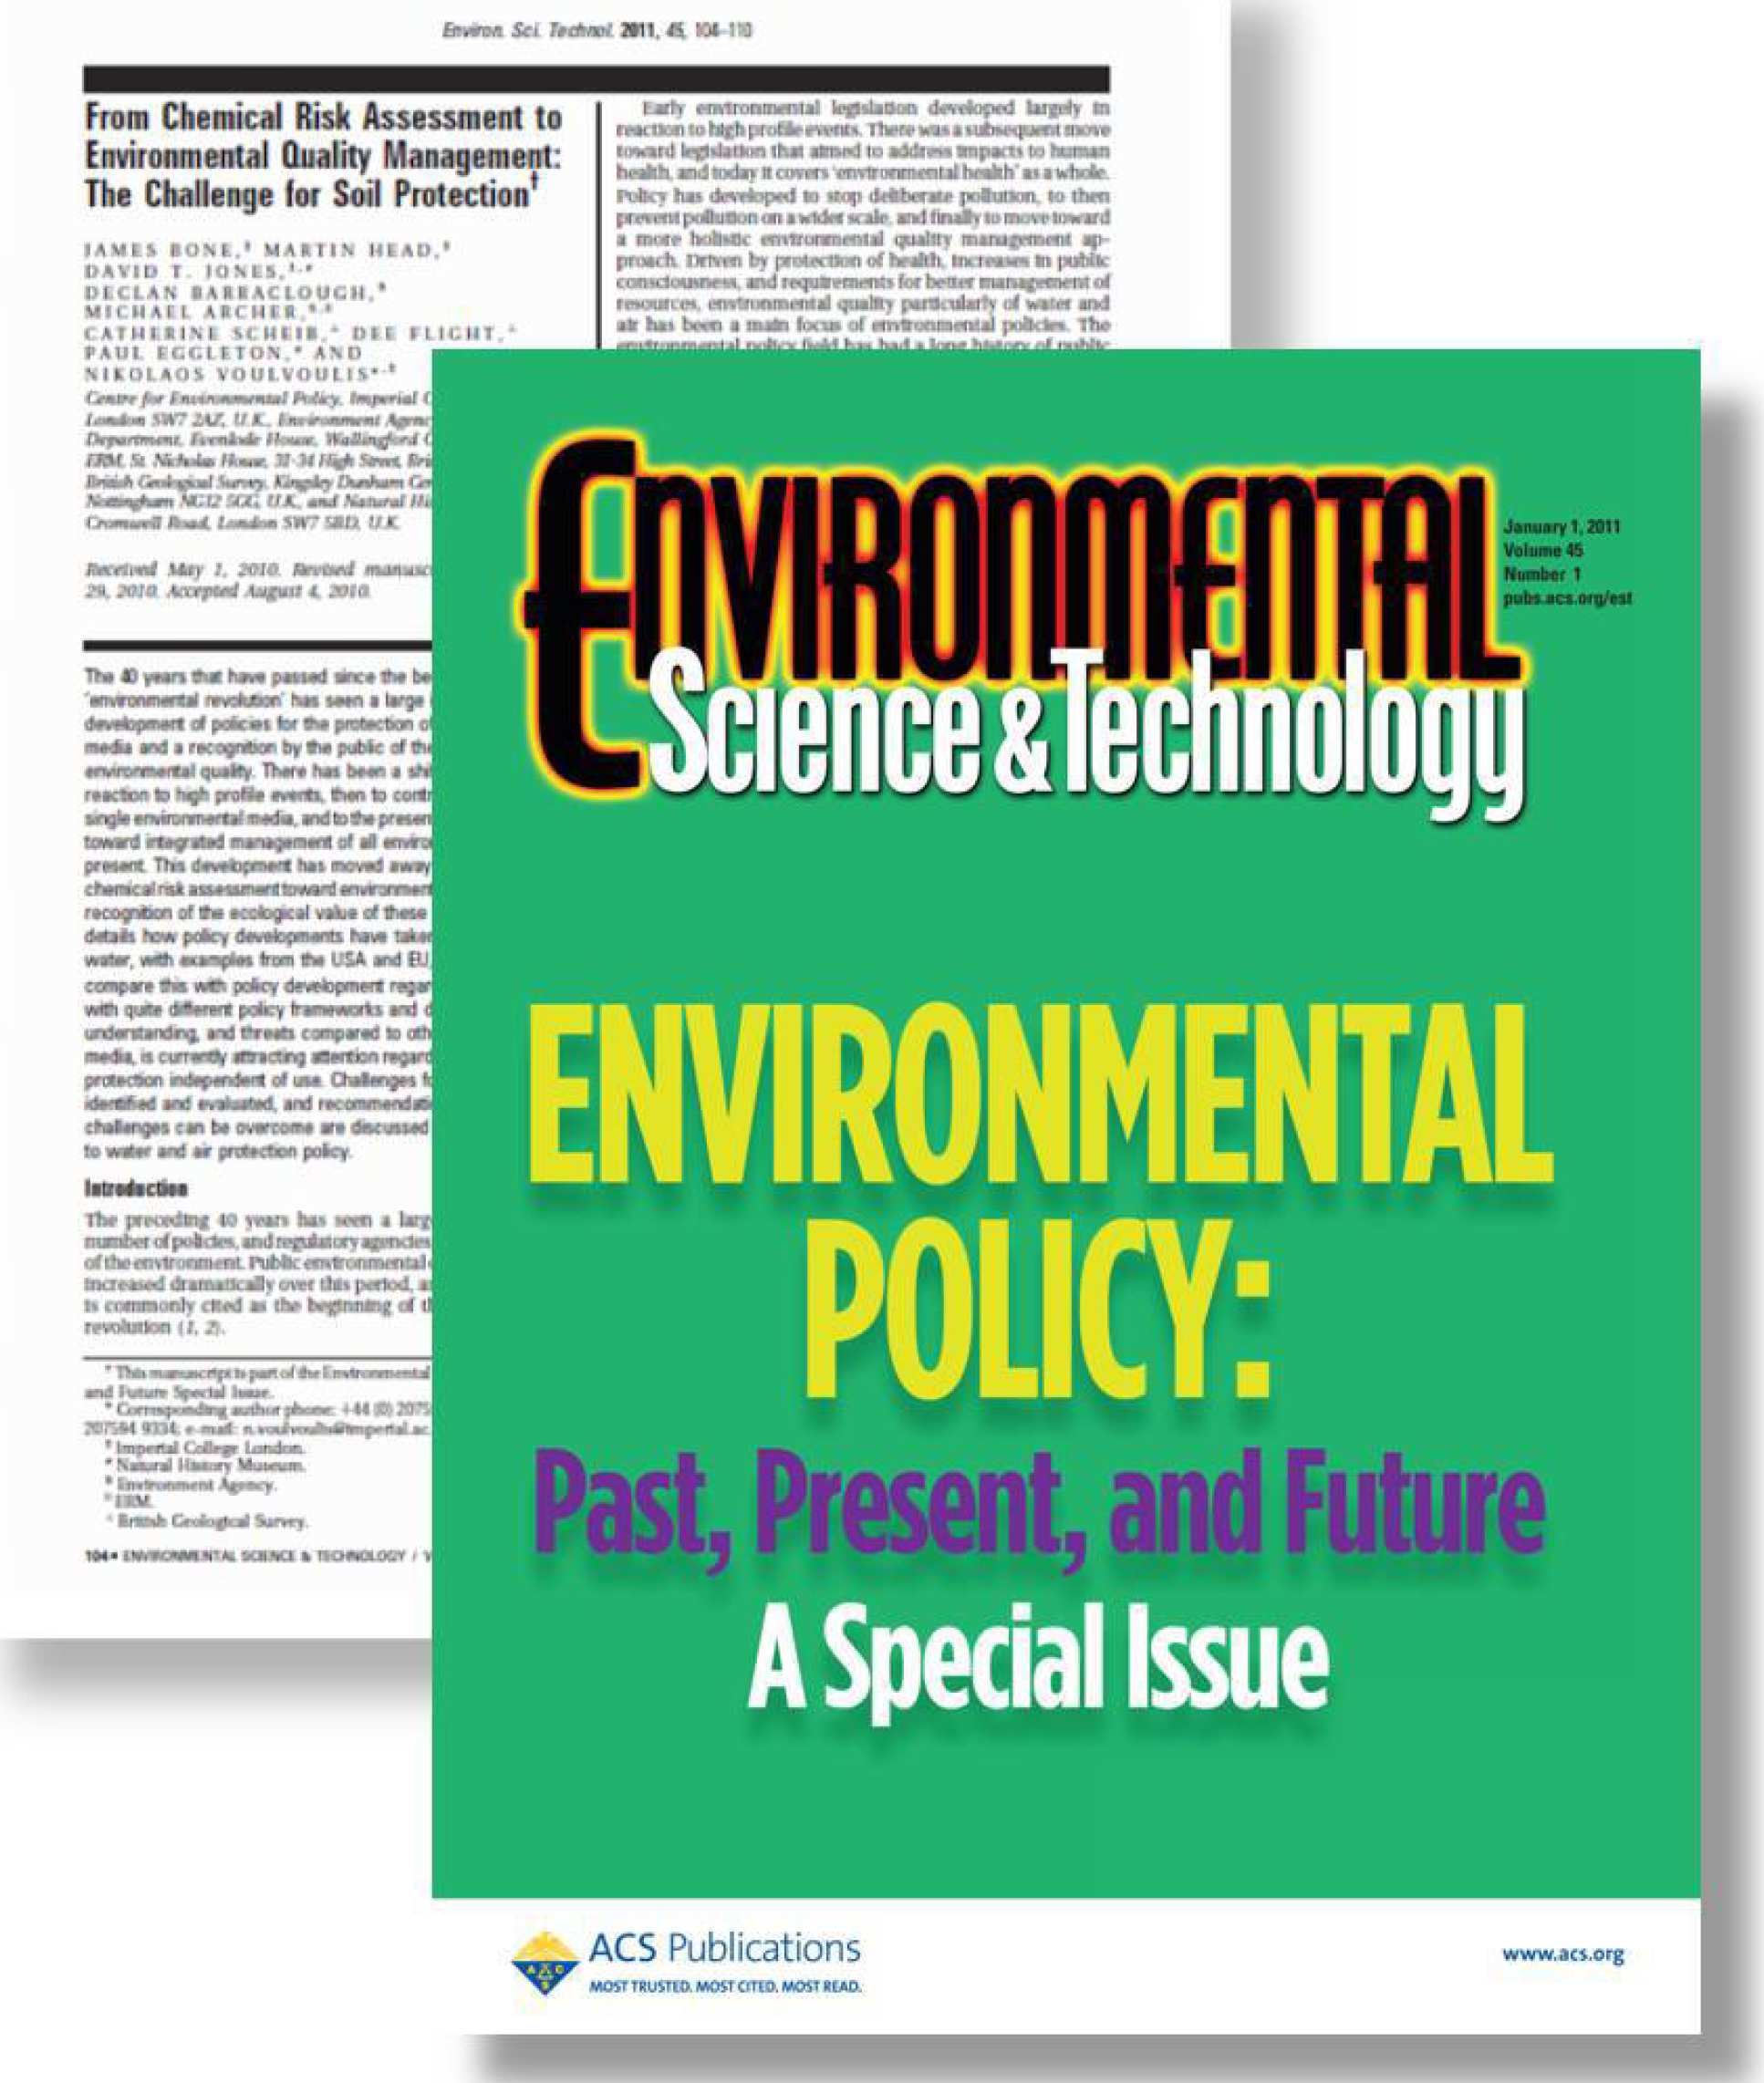  Environmental Policy: Past, Present, and Future 